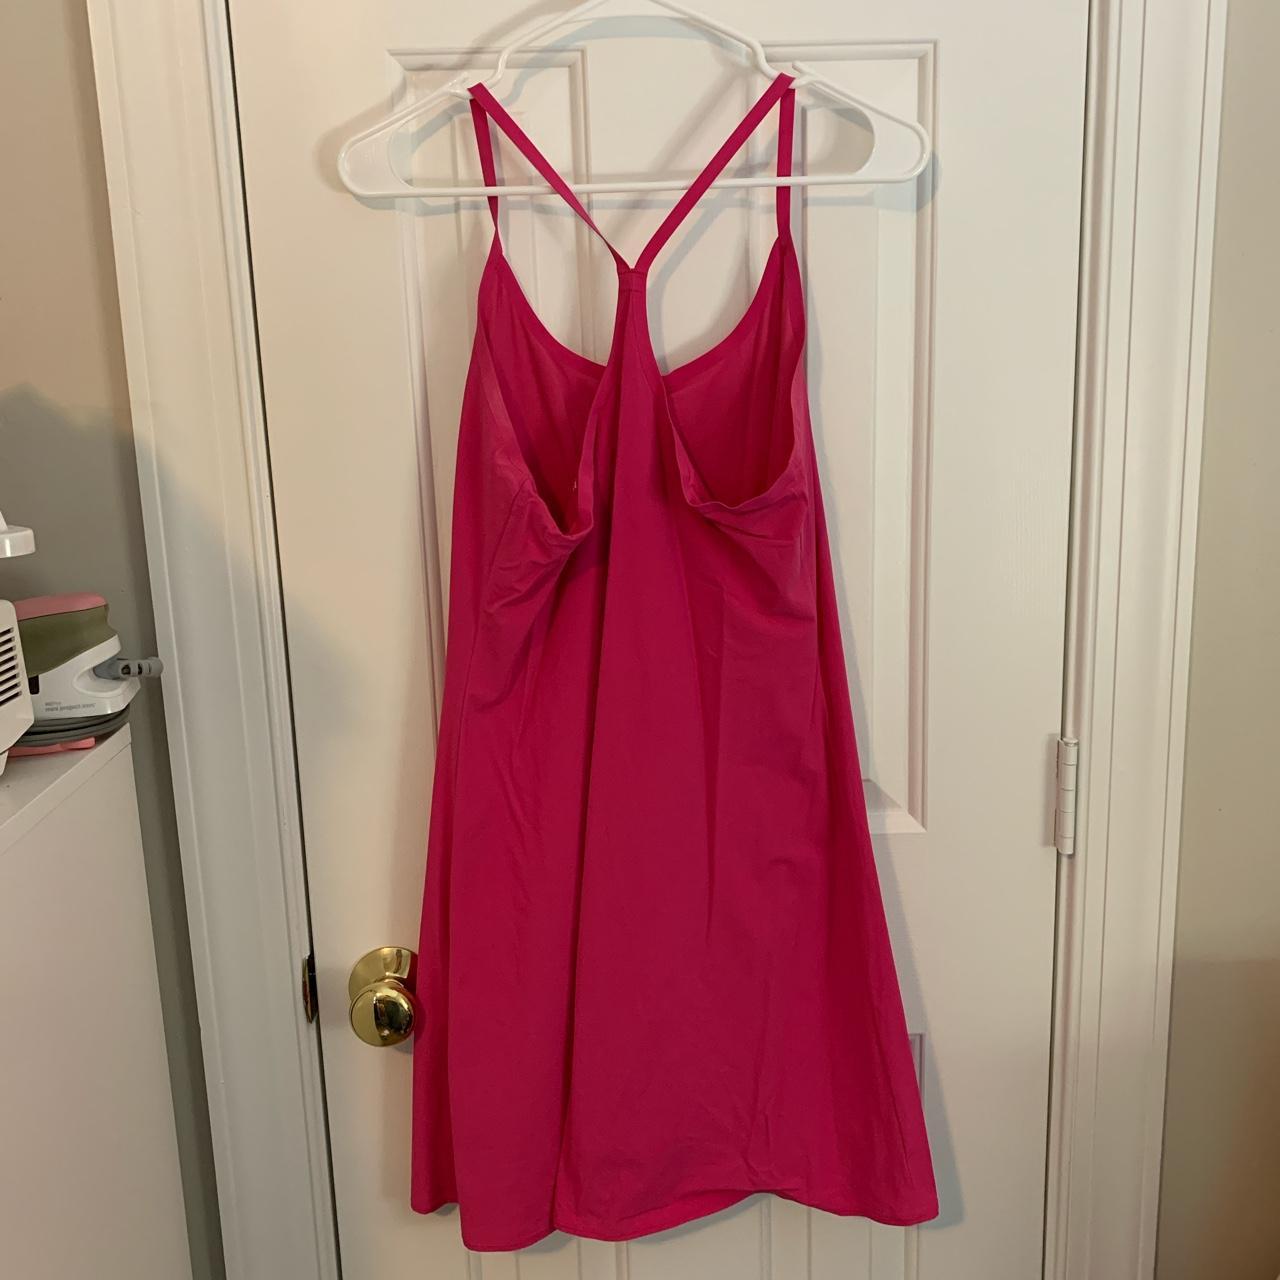 Outdoor Voices Exercise Dress in Pink Size - Depop